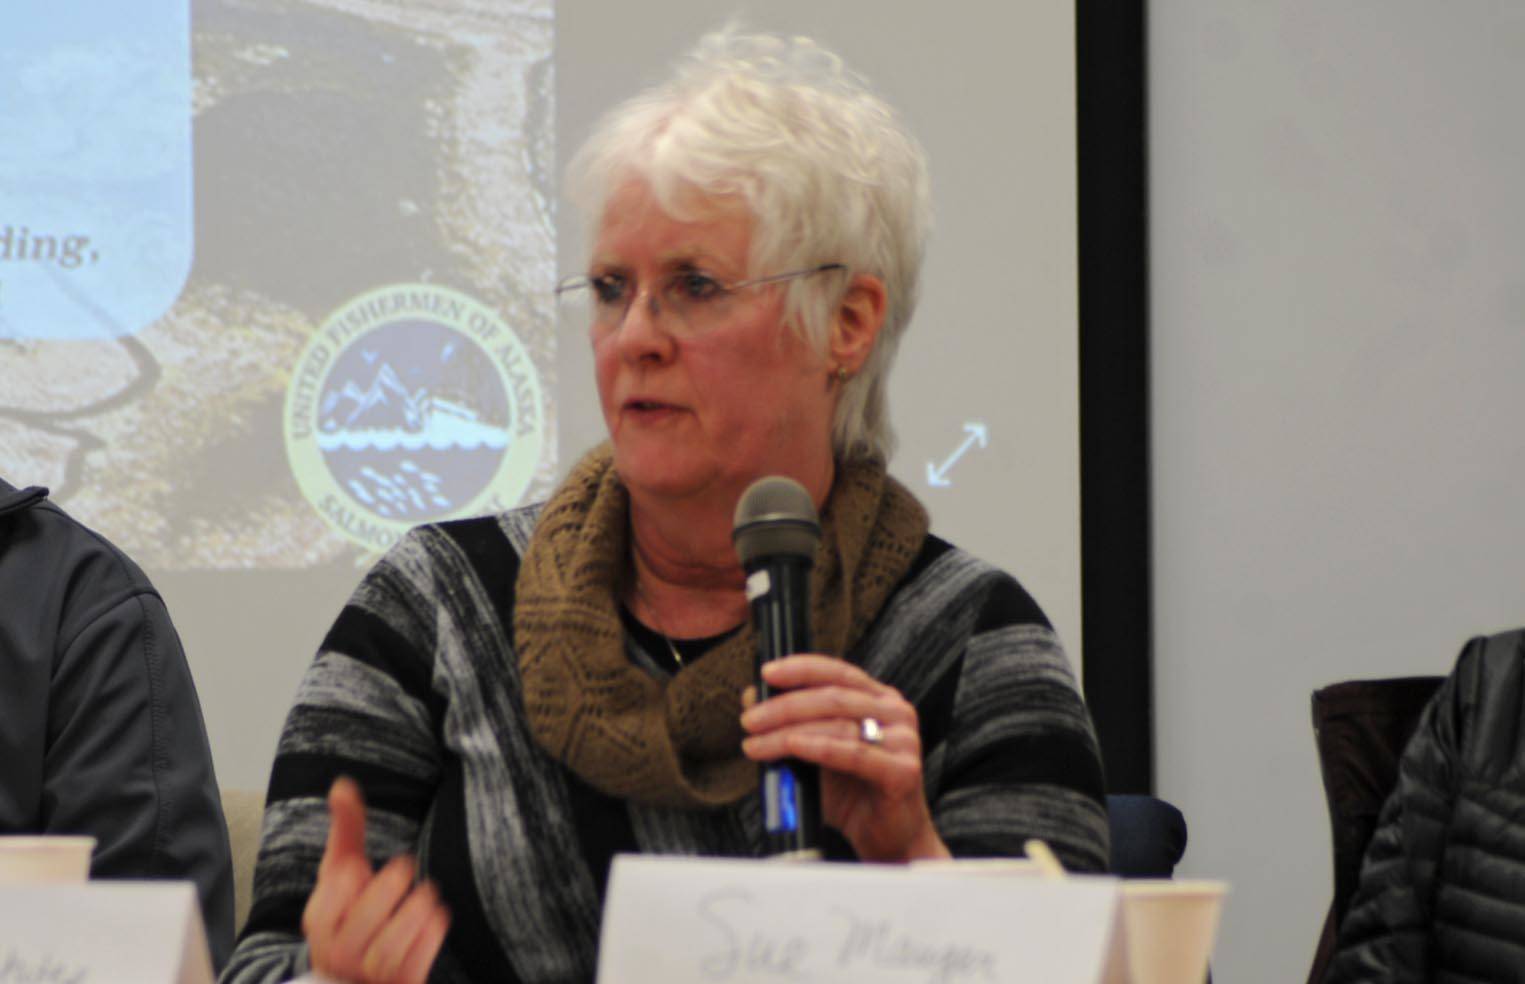 Rep. Louise Stutes, R-Kodiak, addresses a question during a forum on salmon habitat policy at Cook Inlet Aquaculture Association’s headquarters Thursday, Dec. 14, 2017 in Kenai, Alaska. A group of panelists discussed the merits of the current salmon habitat permitting process, contained within Title 16 of the Alaska Administrative Code, and a proposed ballot initiative that would significantly tighten restrictions on permitting for projects that impact salmon streams. (Photo by Elizabeth Earl/Peninsula Clarion)